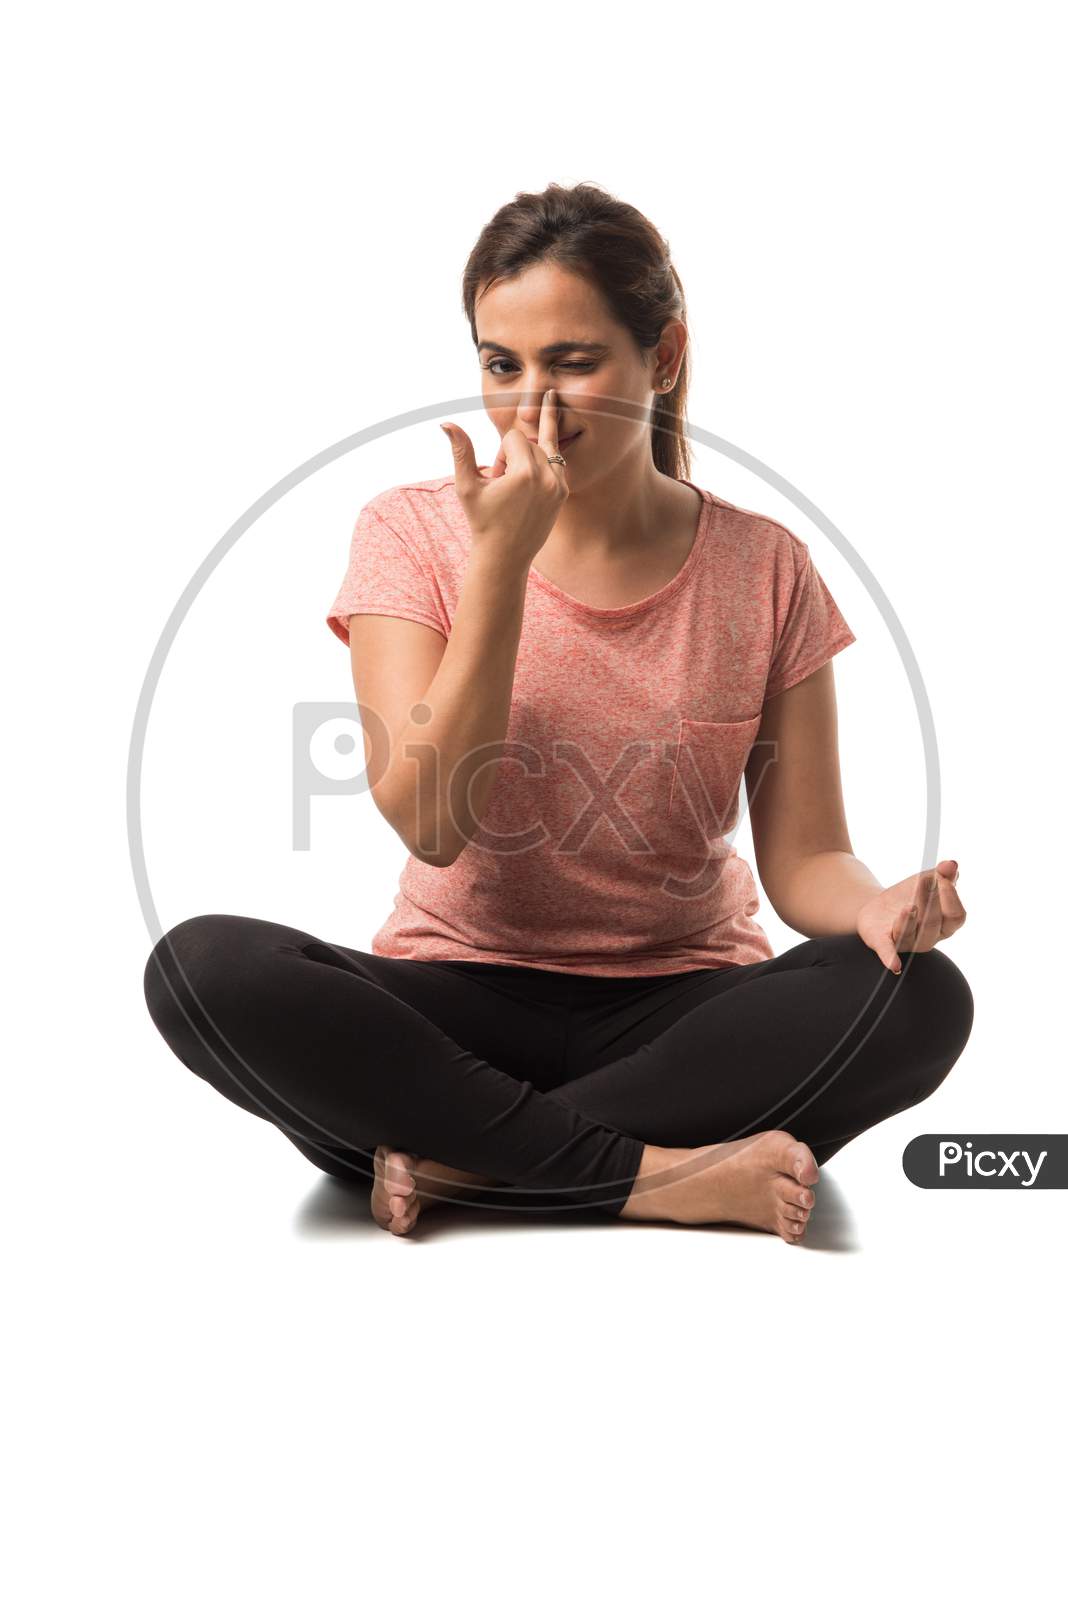 Indian Woman / Girl performing Yoga asana or meditation or dhyan, sitting isolated over white background